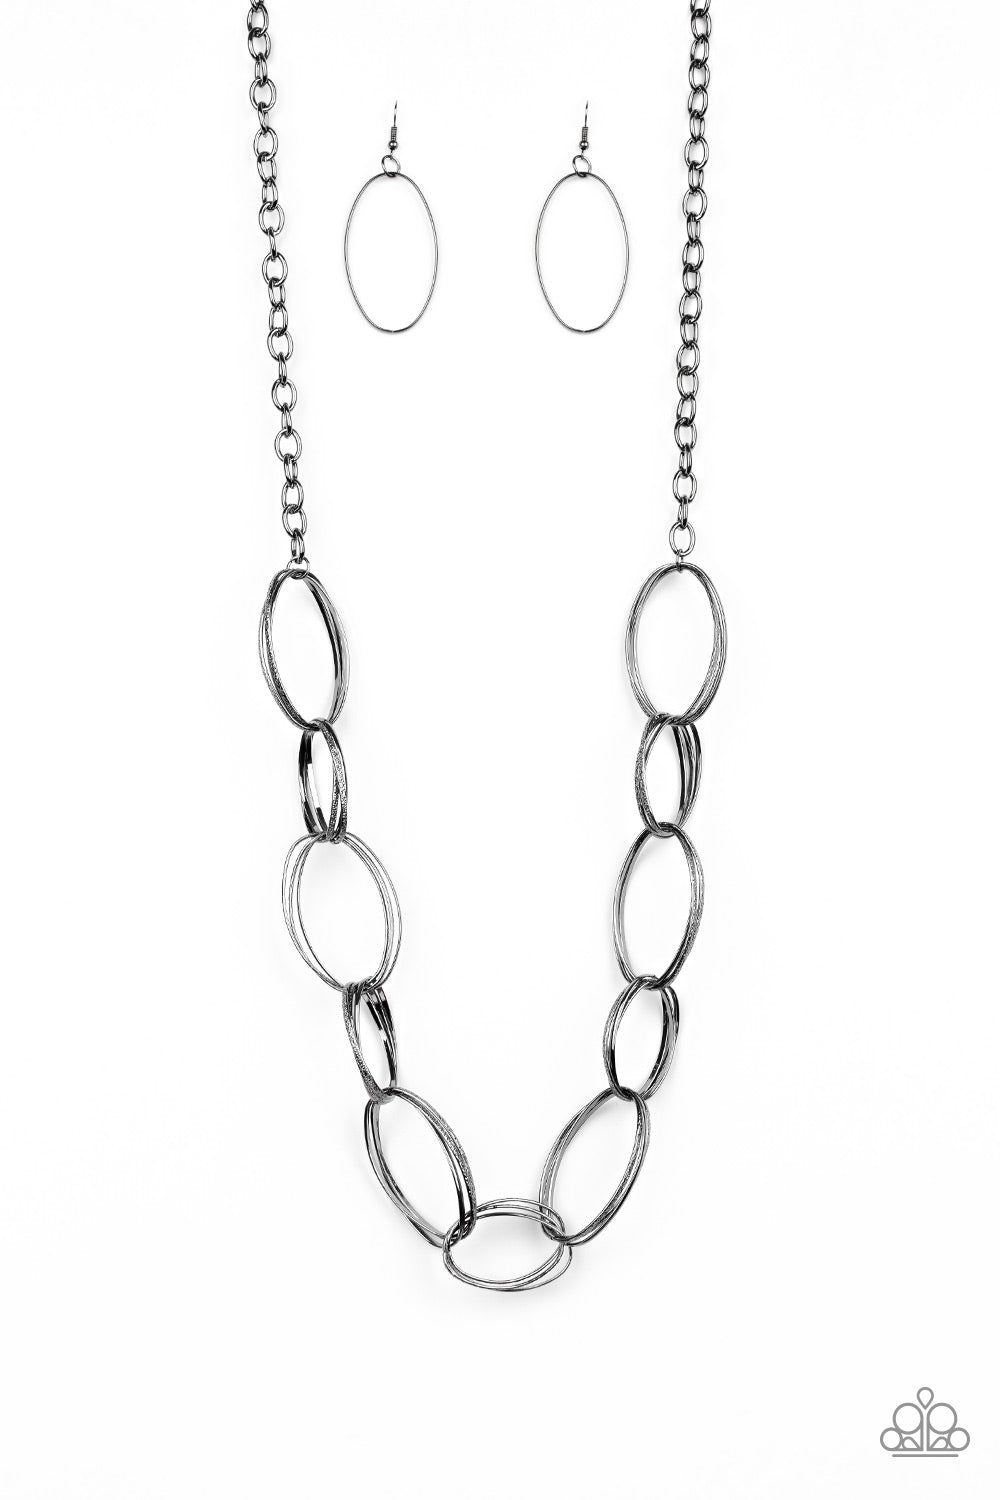 Ring Bling - Black Necklace